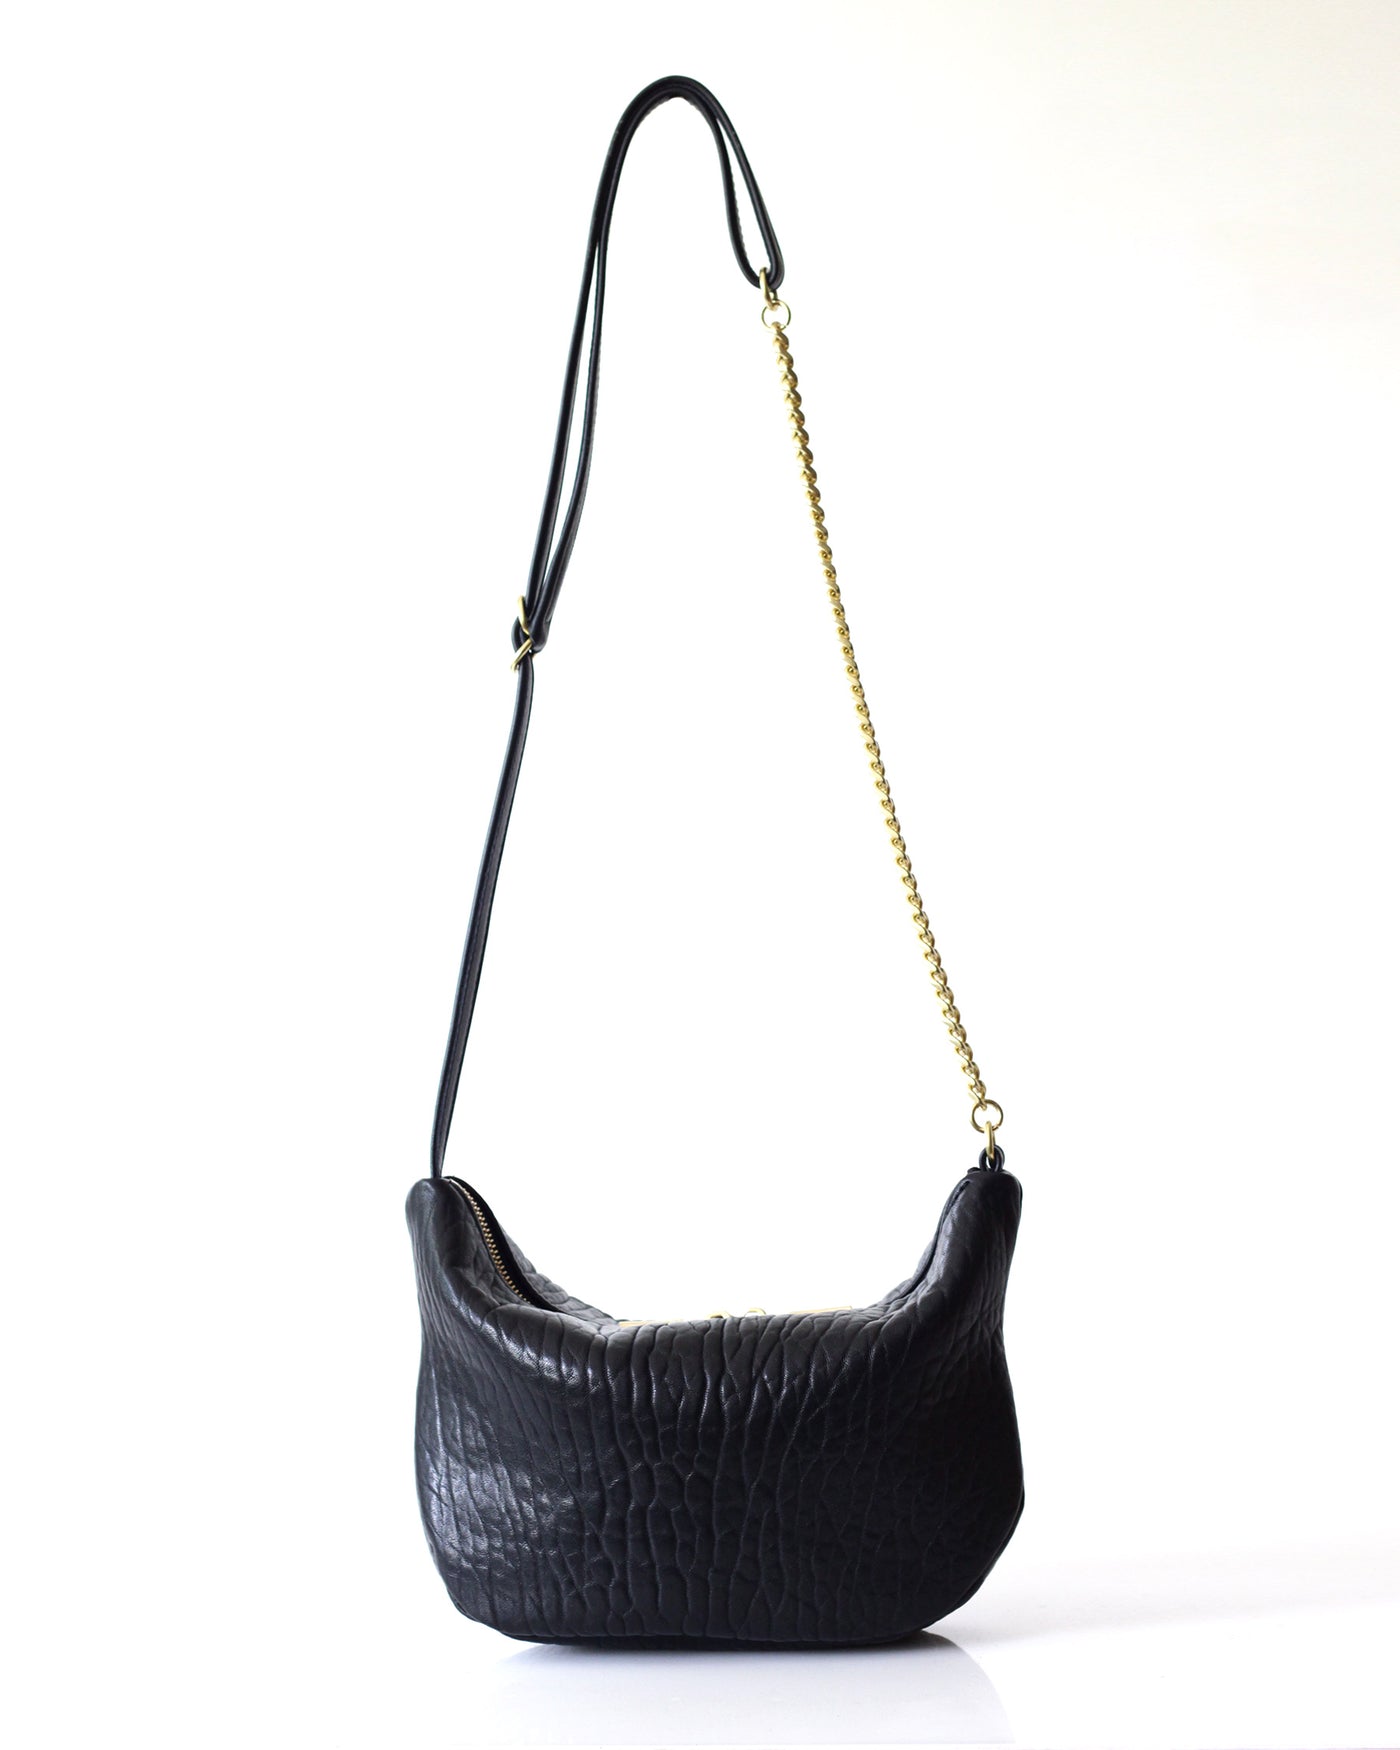 Alma Baby Sling | Shrunken Lamb - Opelle bag AW22 - Opelle leather handbag handcrafted leather bag toronto Canada